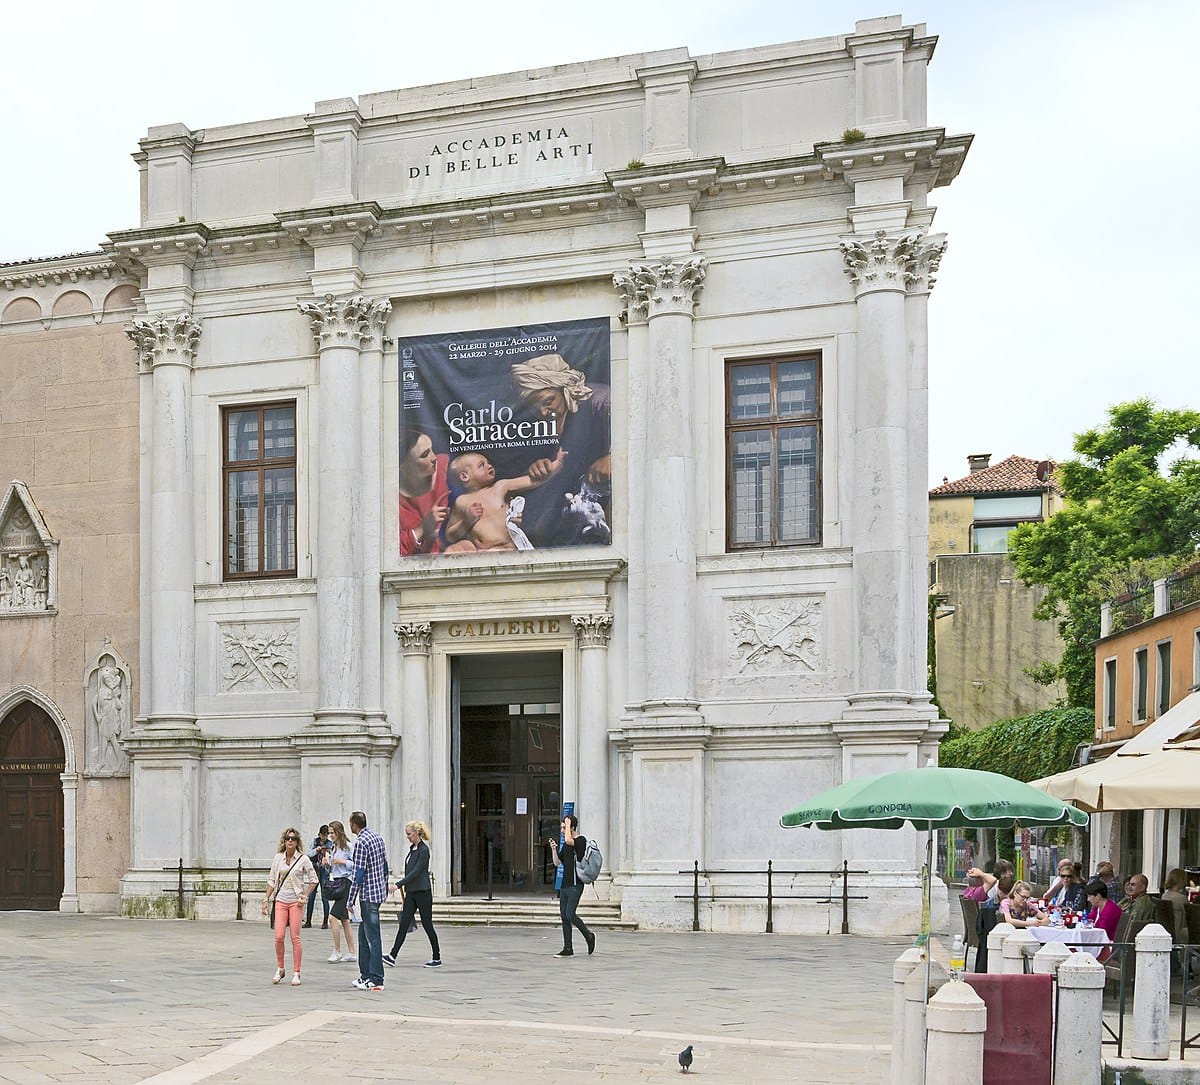 Academy Gallery in Venice; one of the museums in Italy